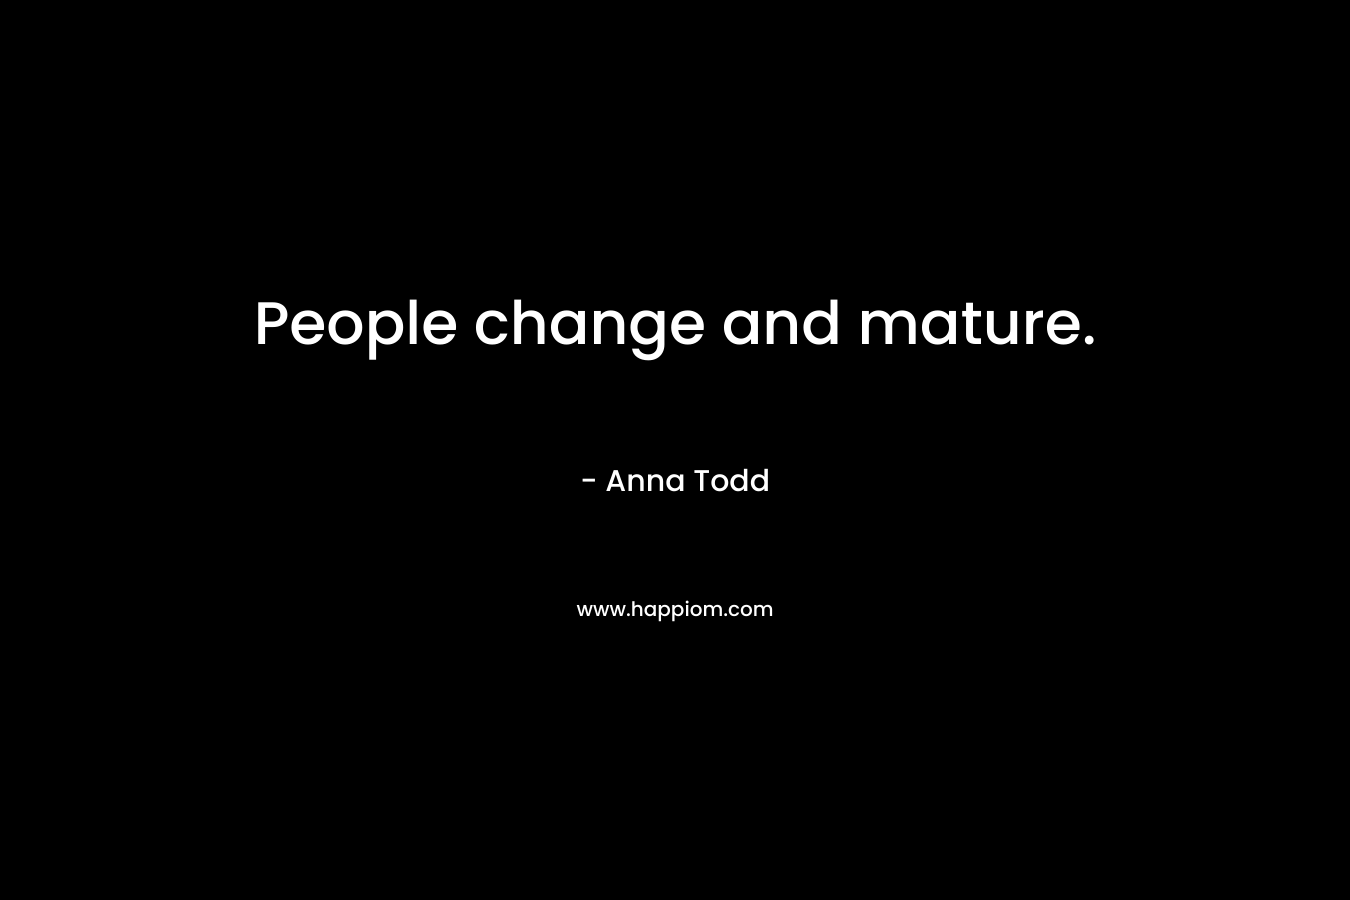 People change and mature.